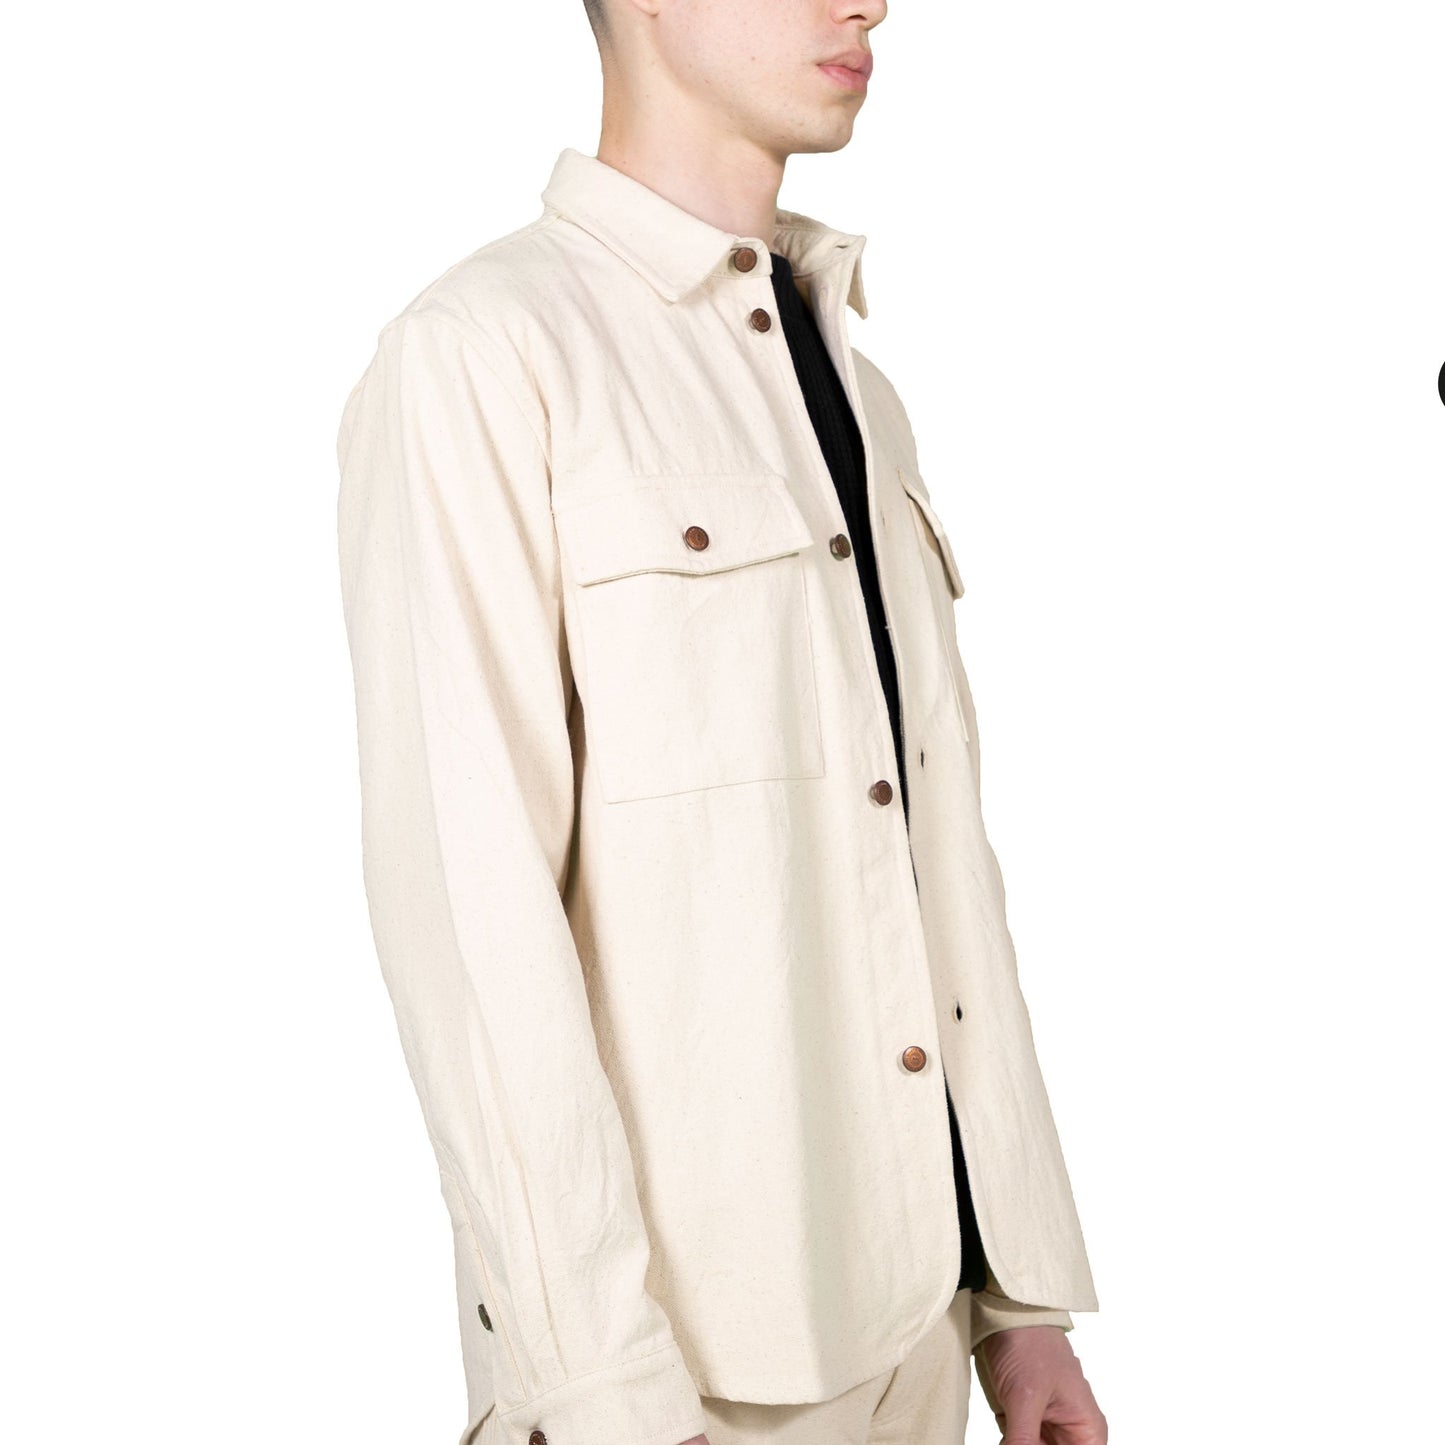 Native North Salt and Pepper Overshirt in Sand